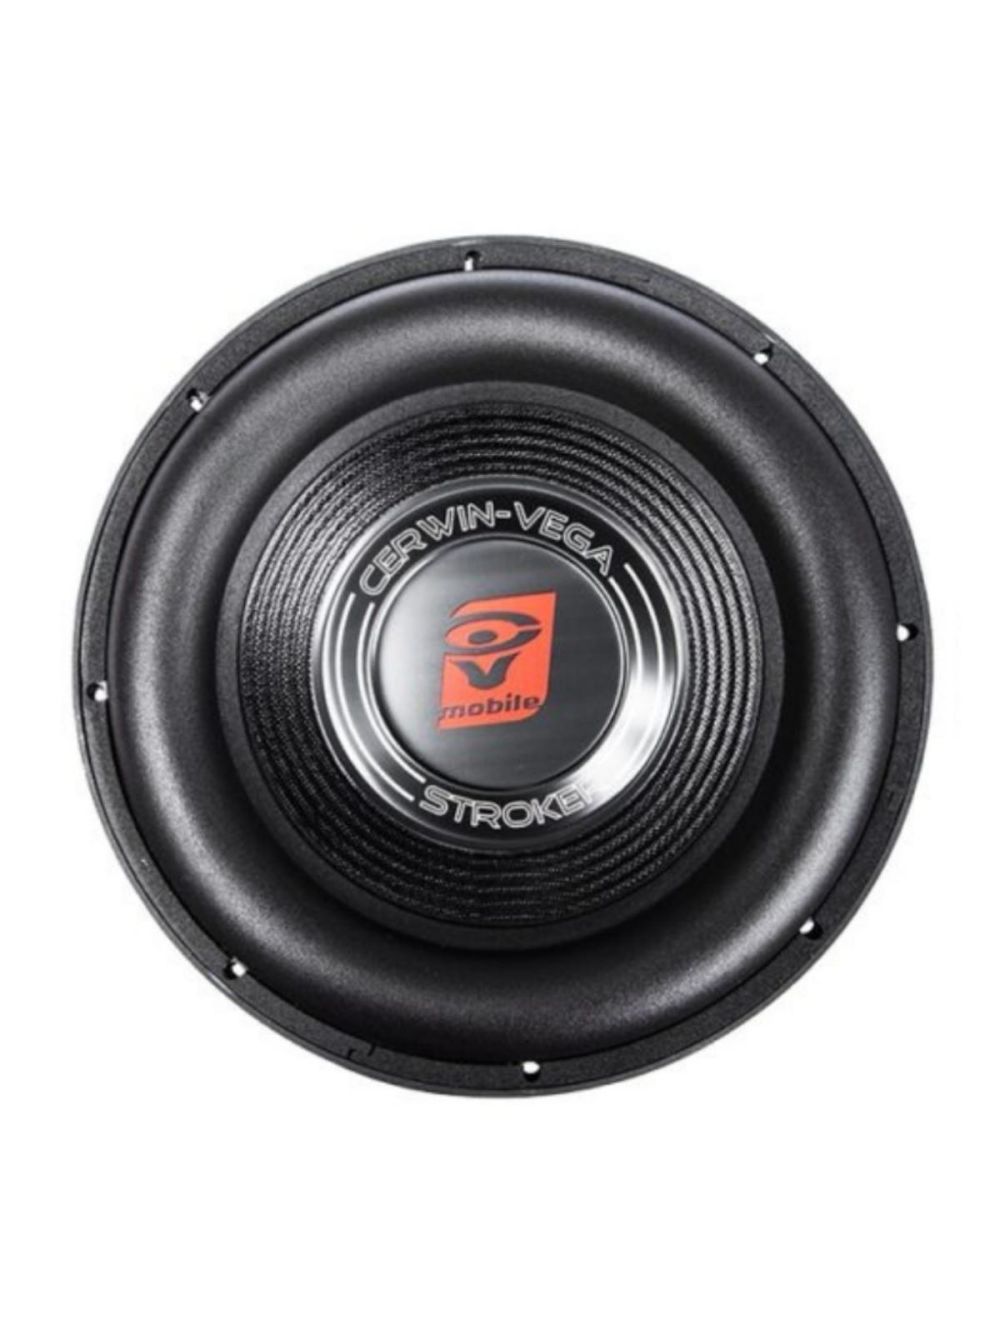 ST102D STROKER Watts Ohms/800Watts RMS Handling Max 10-Inch Dual Voice Coil - Cerwin Vega